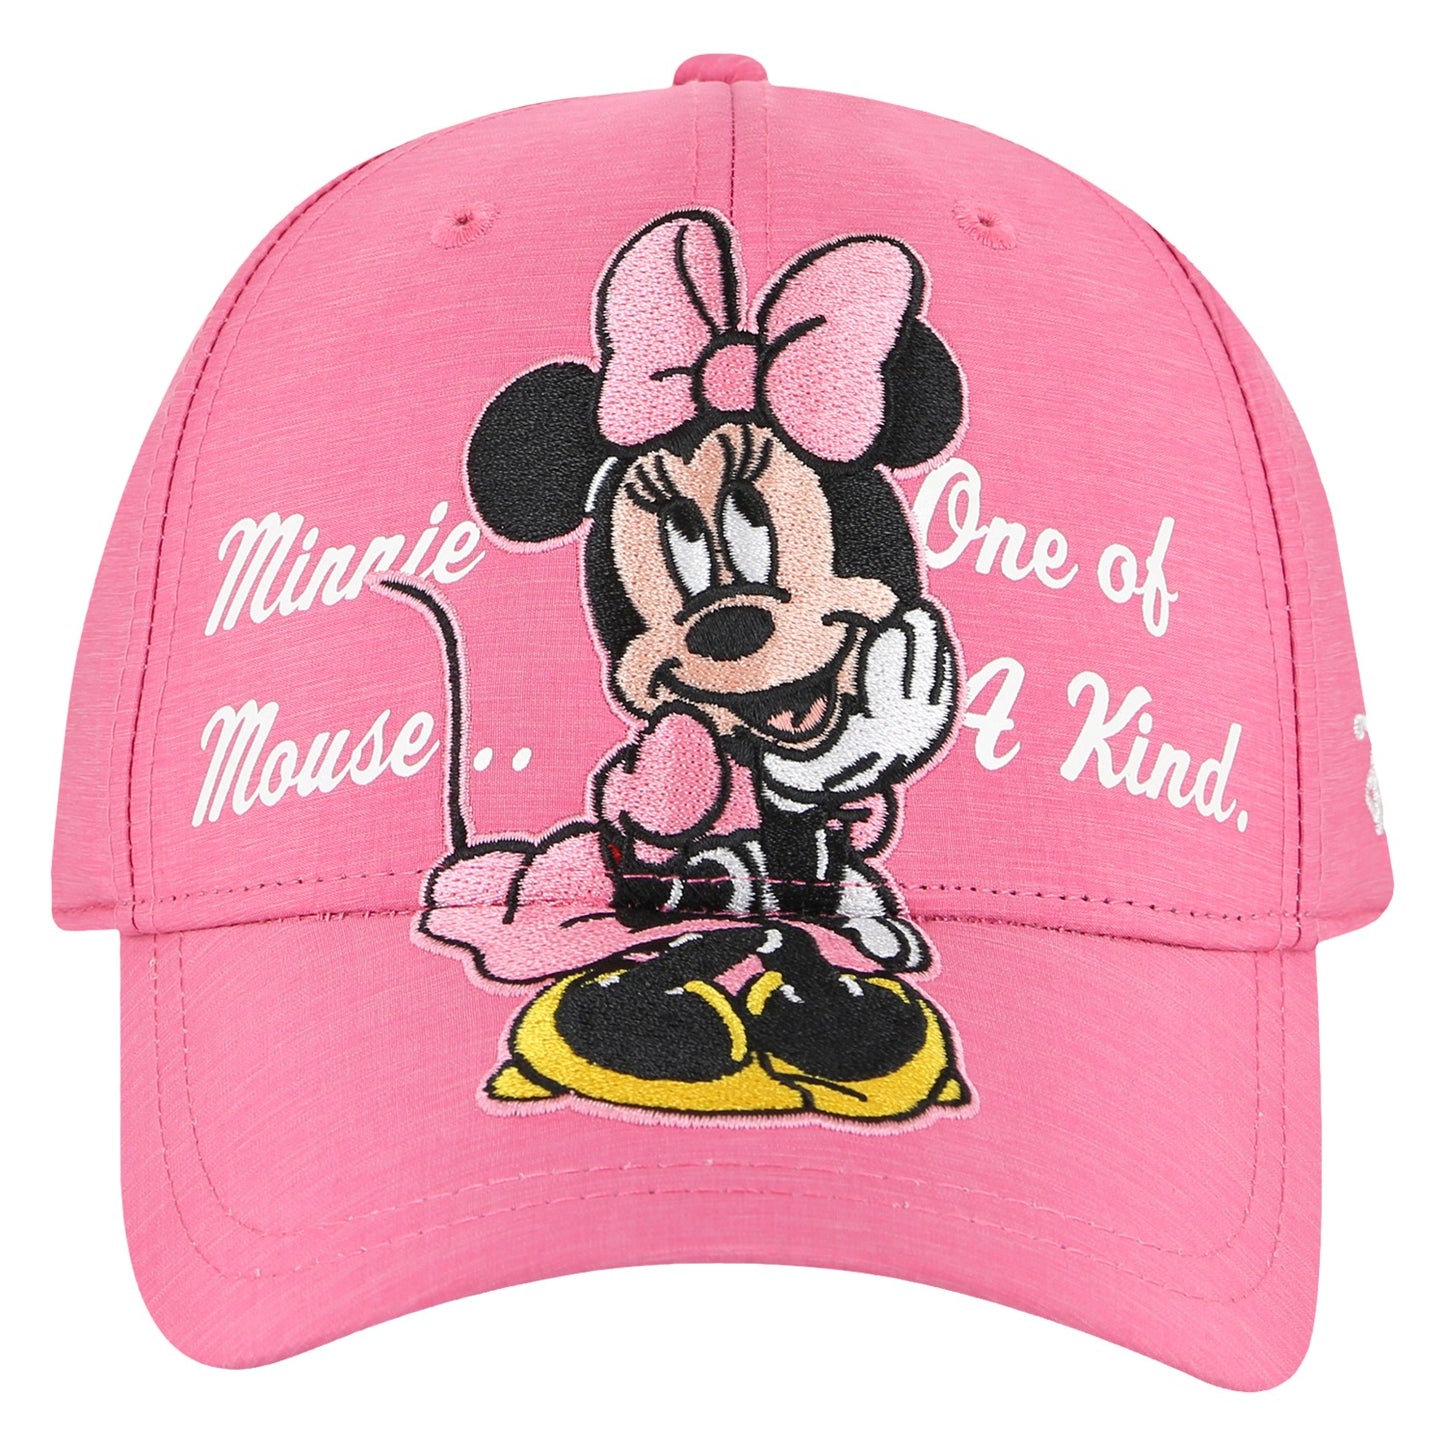 Kids Minnie Mouse Baseball Cap in Pink